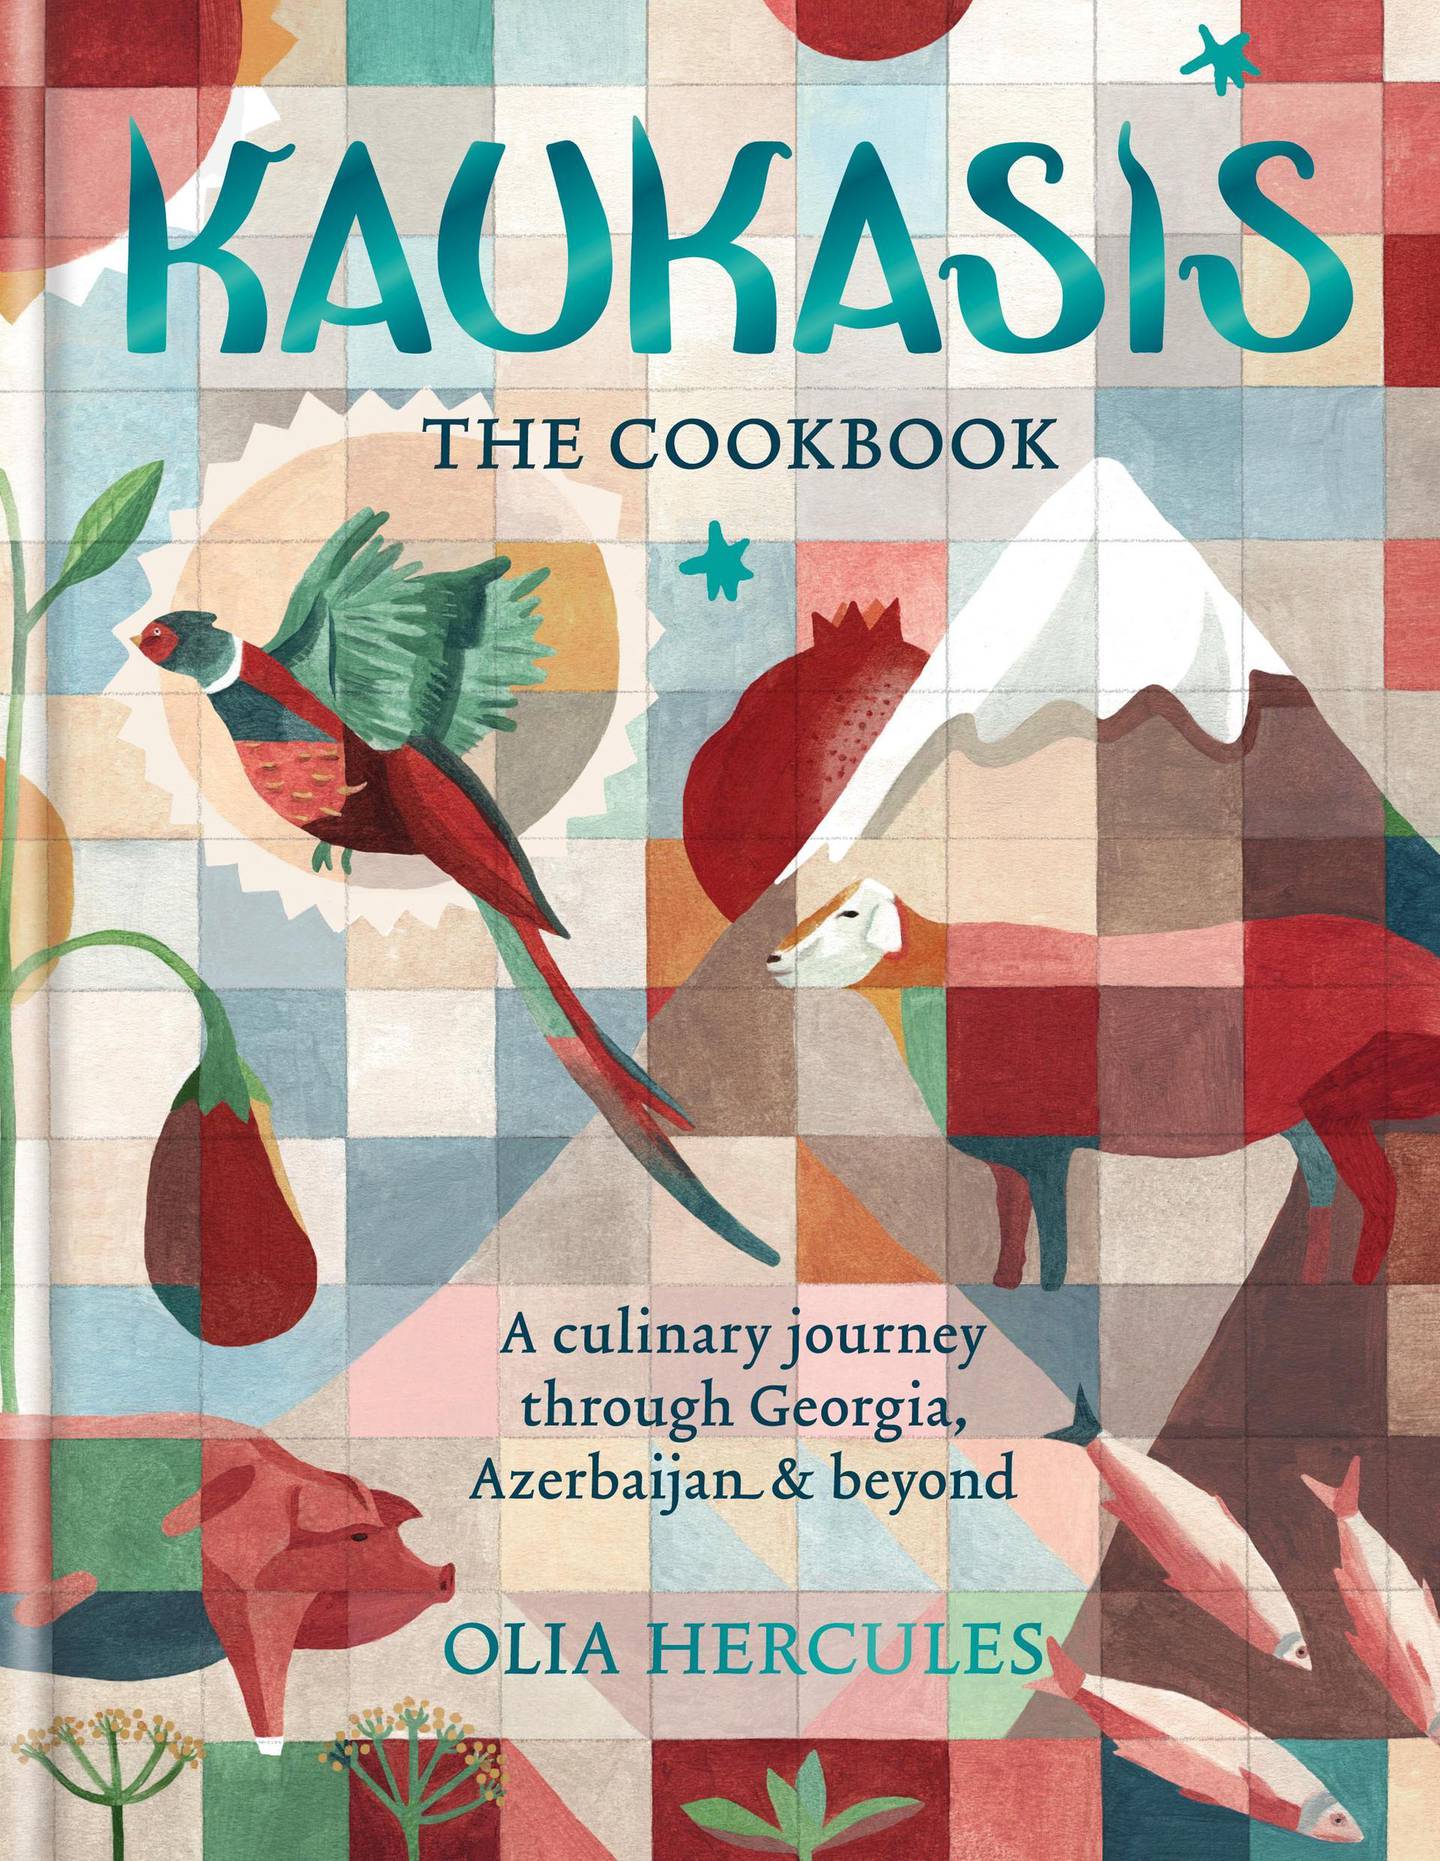 Kaukasis The Cookbook: The culinary journey through Georgia, Azerbaijan & beyond by Olia Hercules published by Mitchell Beazley. Courtesy Octopus Publishing